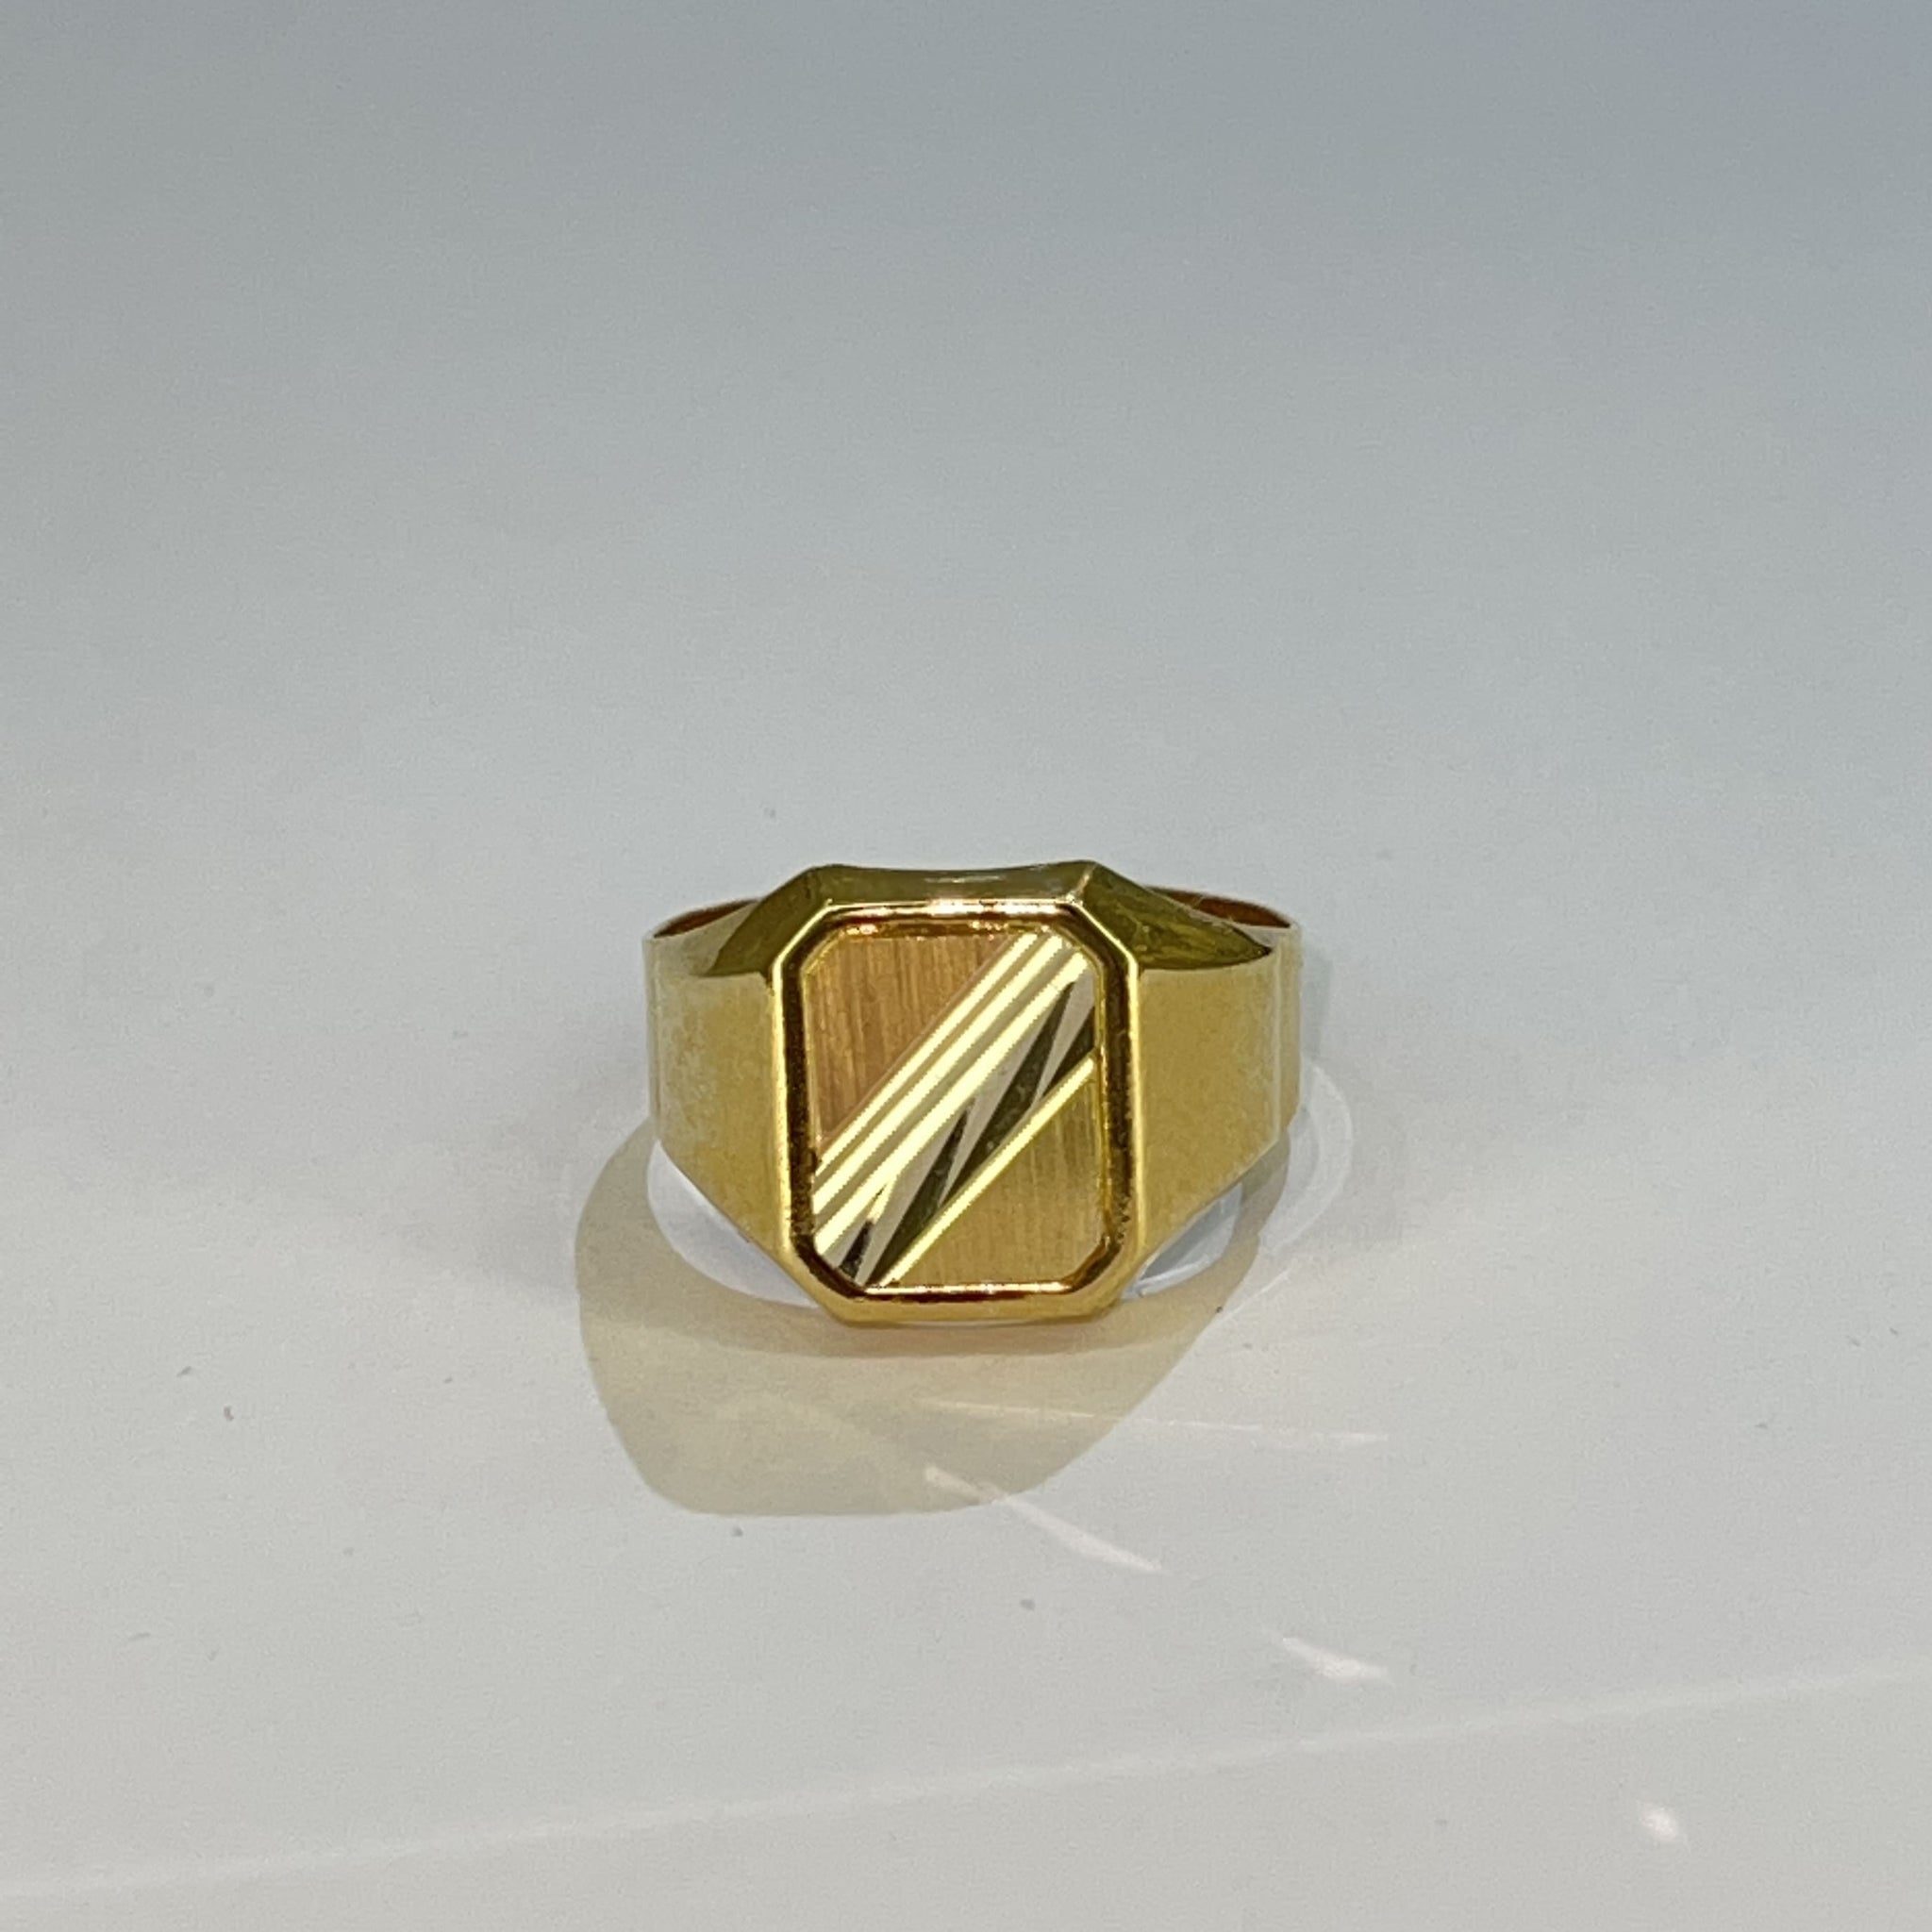 Bicolor Signet Ring - 18 carat gold with Diamond Cuts